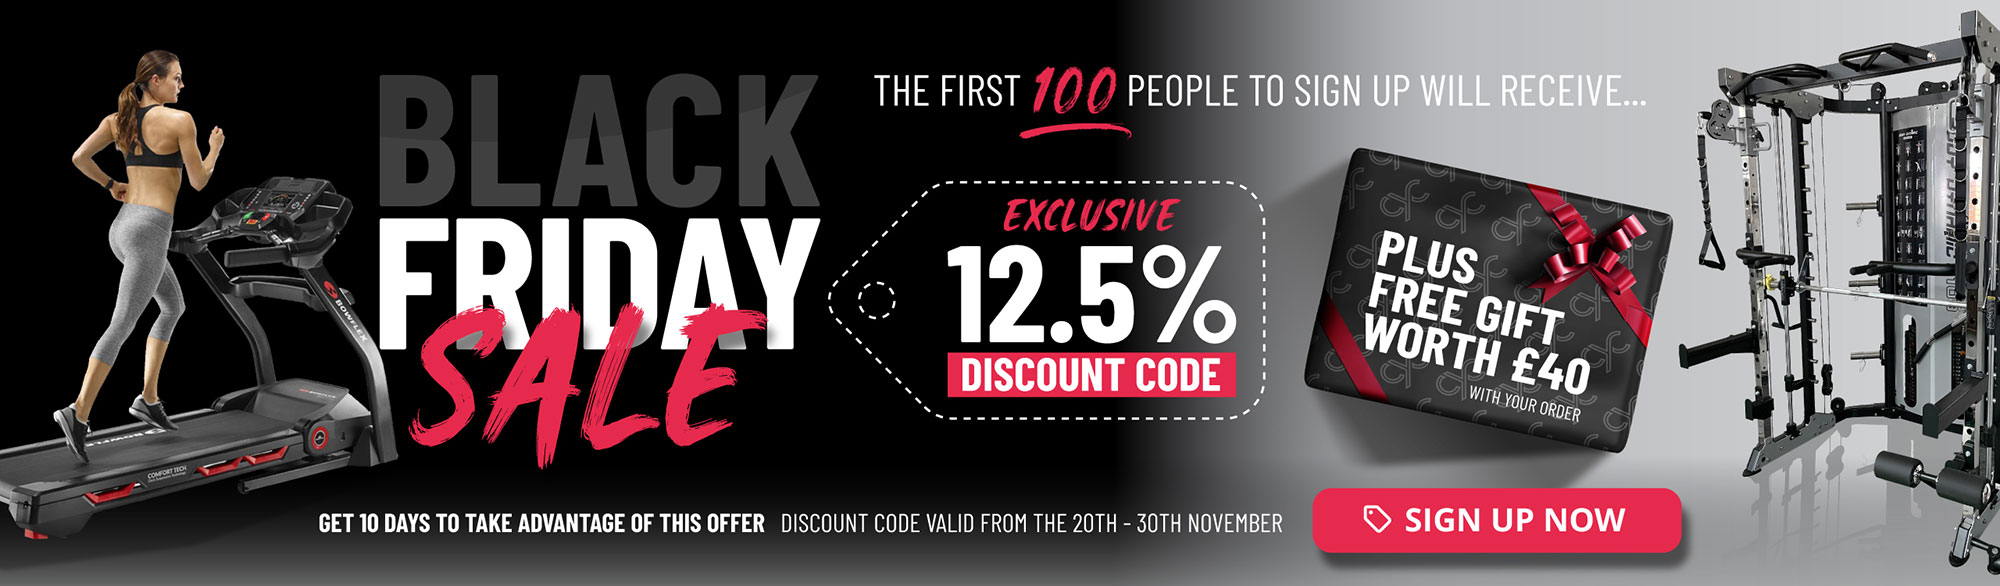 Black Friday Sale - The first 100 people to sign up will receive an exclusive 12.5% discount code plus free gift worth £40 with your order (valid 20th - 30th November) Sign up now